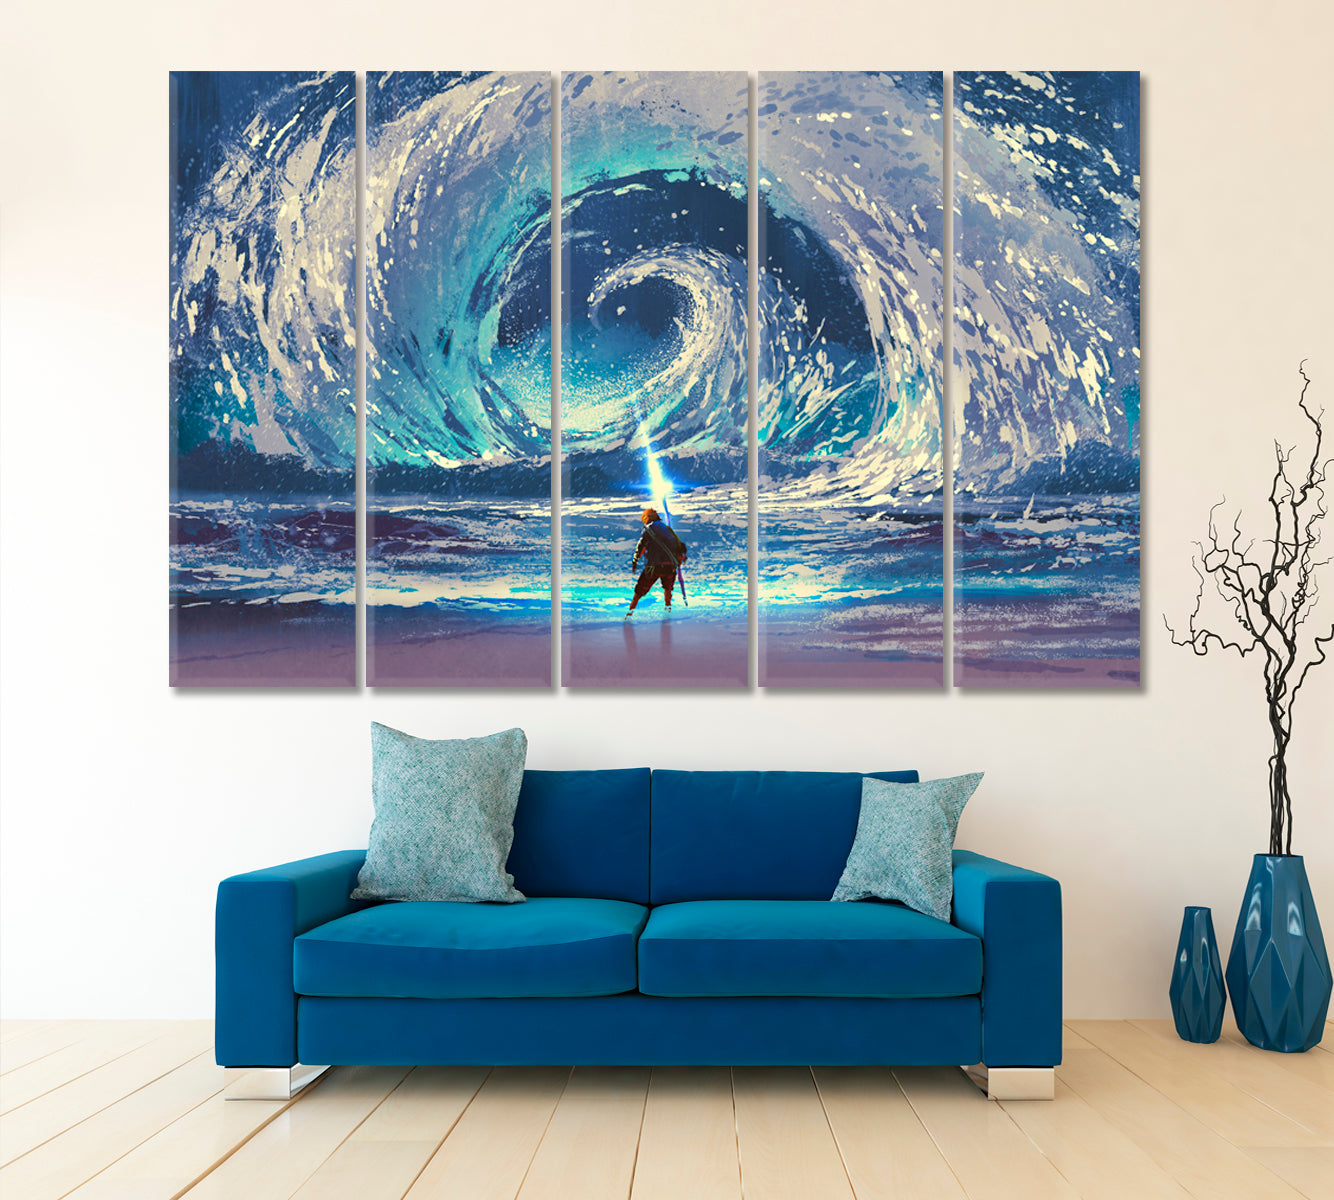 Man Magic Spear Swirling Sea In The Sky Surreal Art Abstract Art Print Artesty 5 panels 36" x 24" 